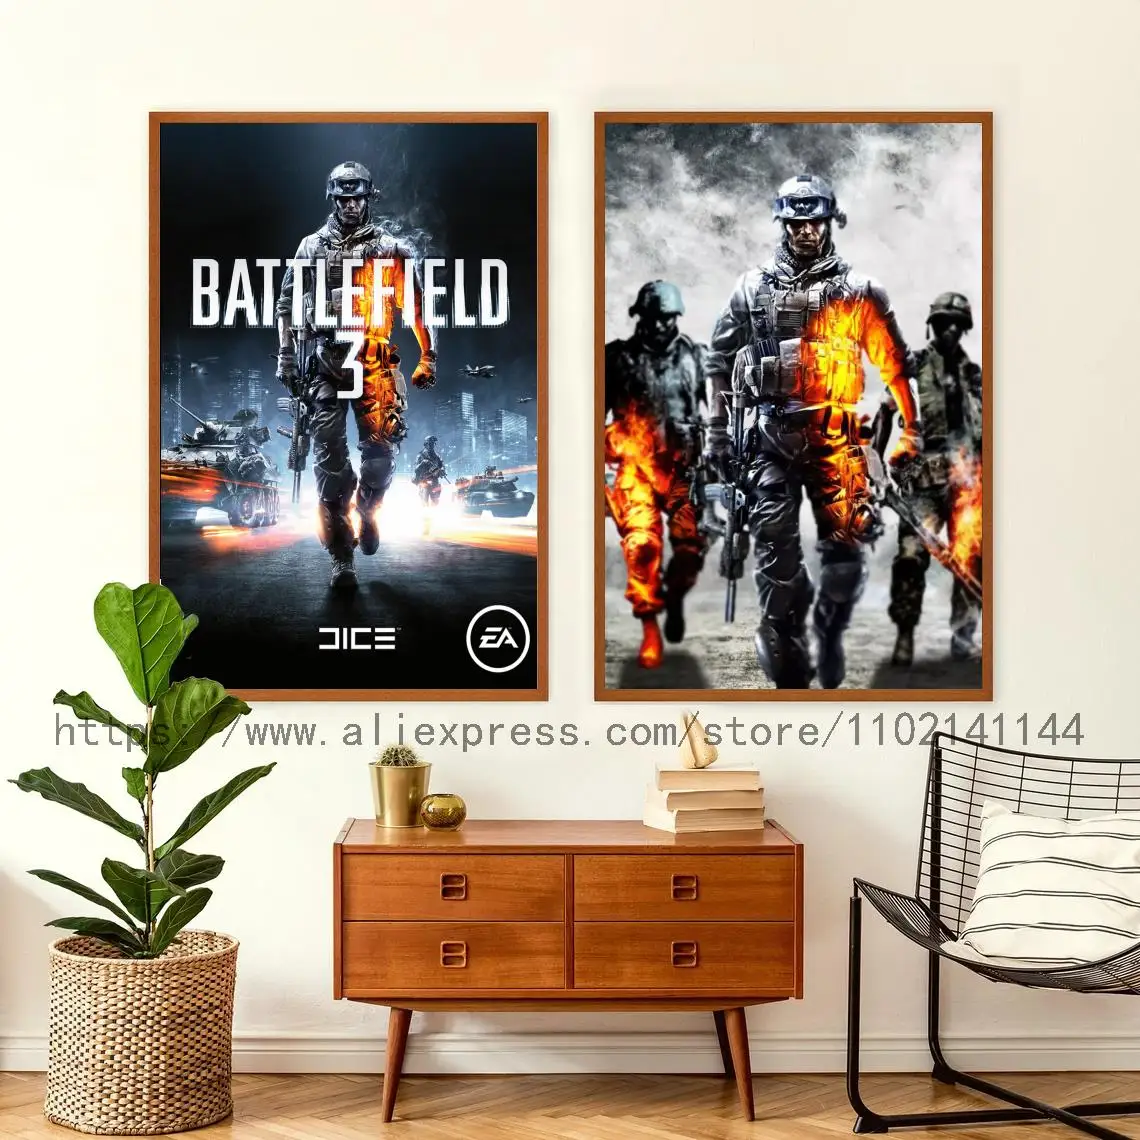 

Battlefield 1 Video Game Decoration Art Poster Wall Art Personalized Gift Modern Family bedroom Decor Canvas Posters